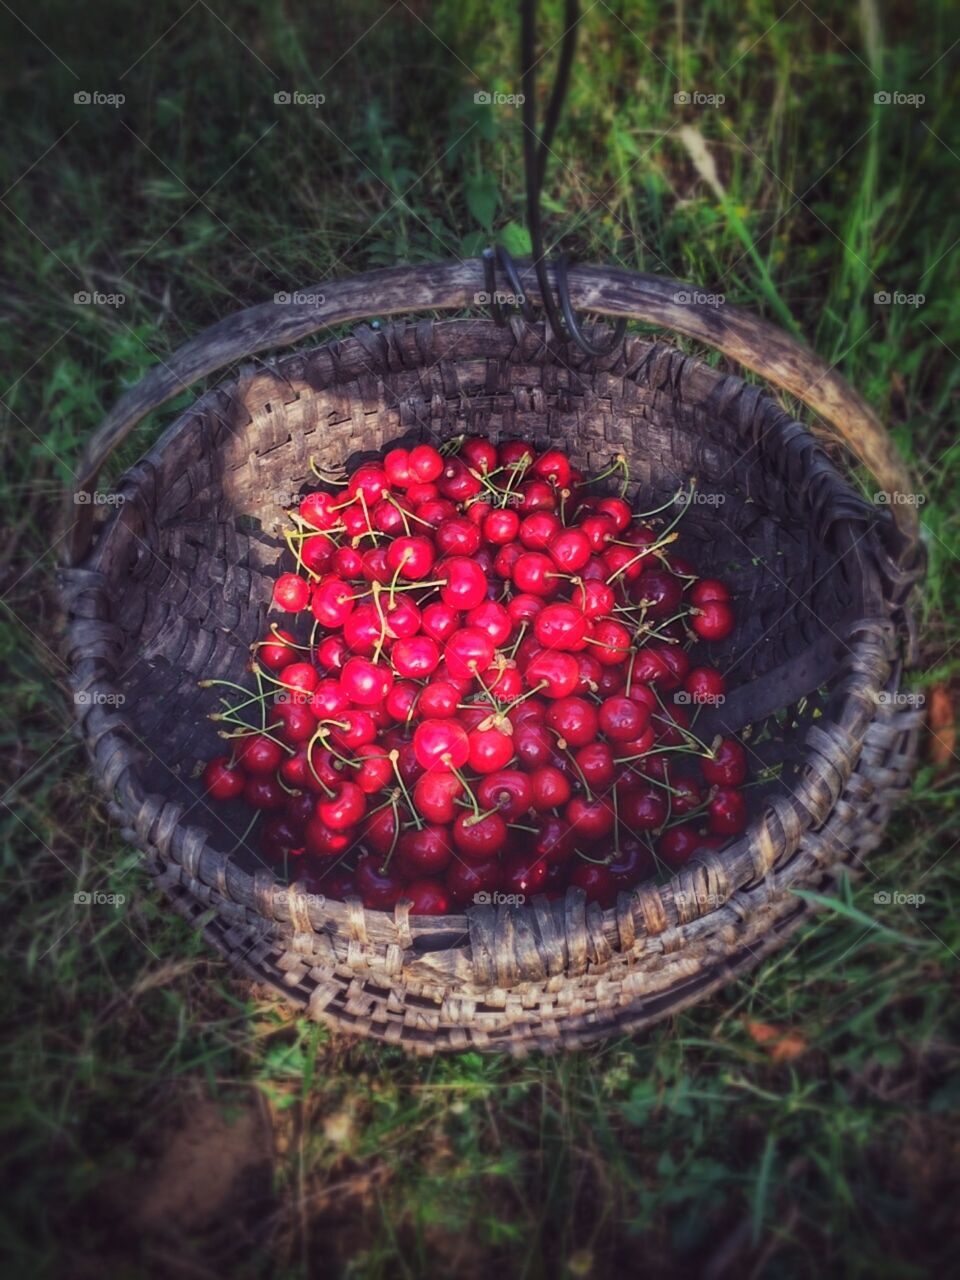 Sweet Cherries. A warm photo taken during a summer day